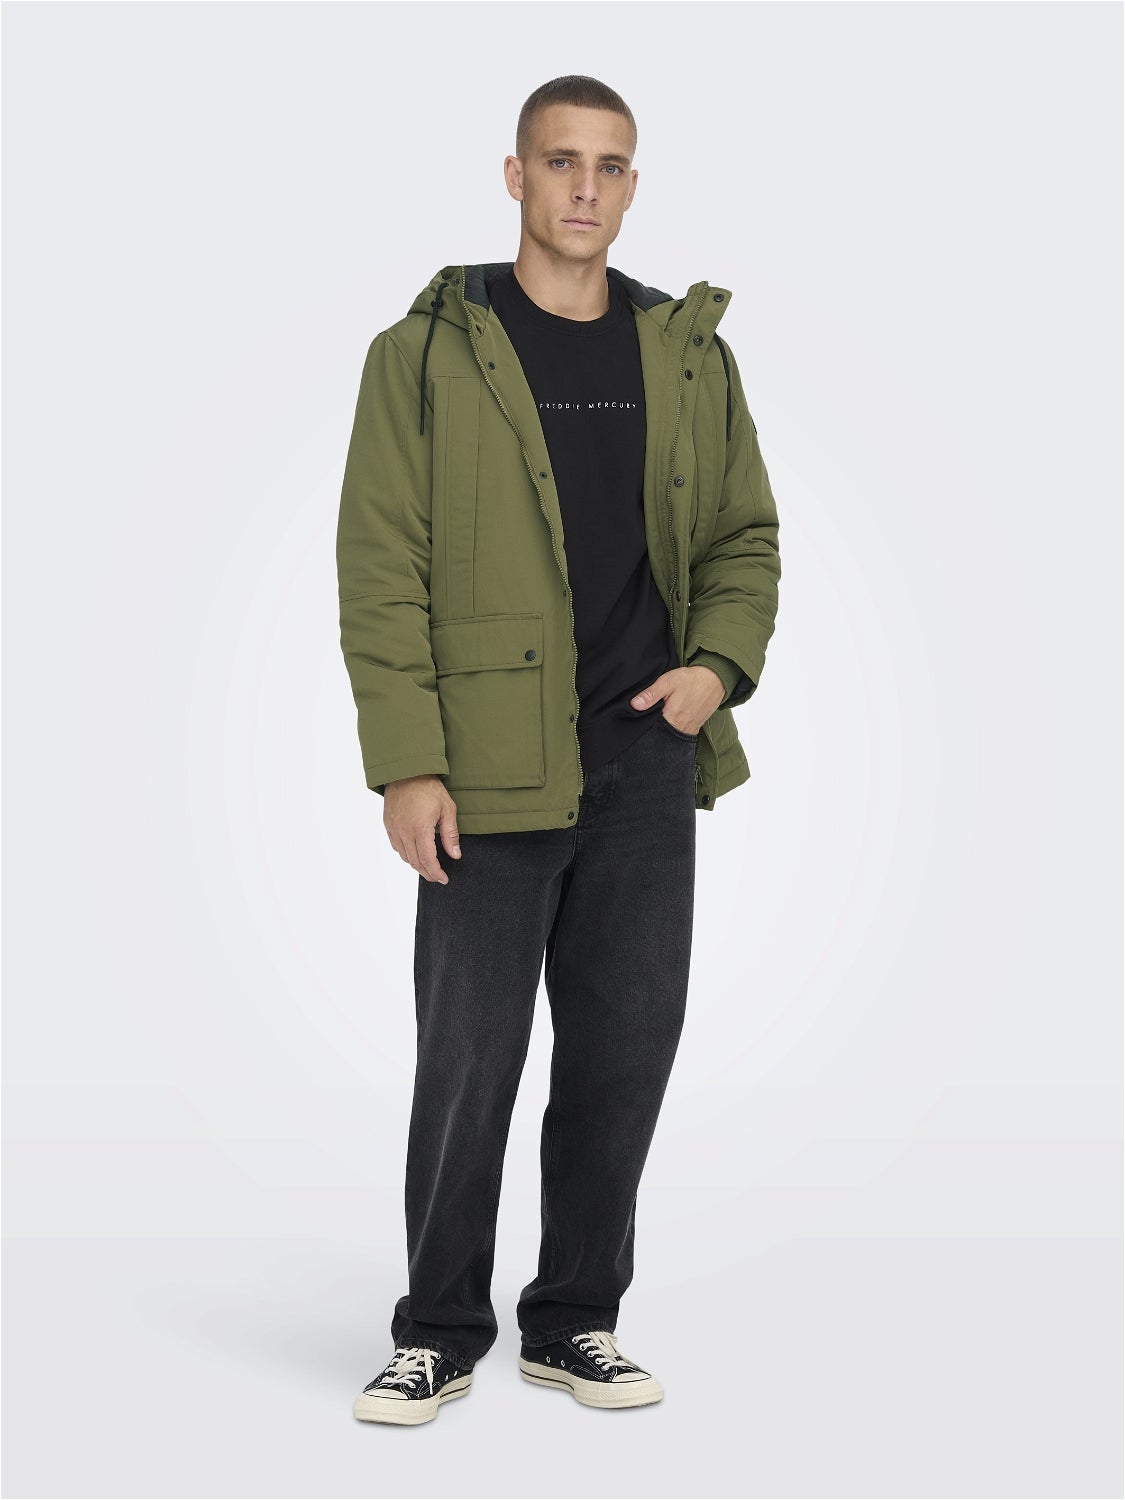 Parka jacket with hood with 20% discount! | ONLY & SONS®